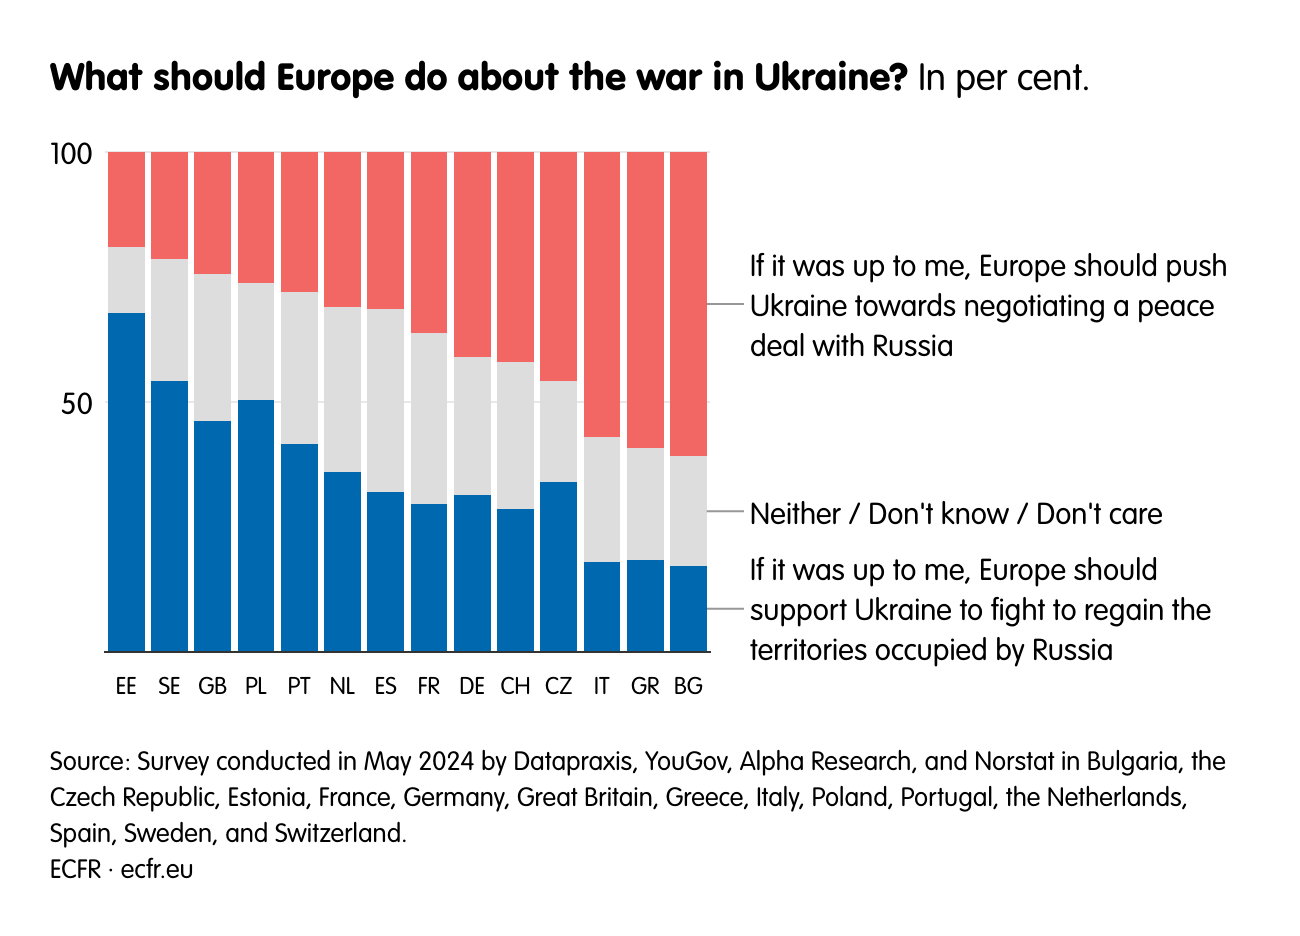 What should Europe do about the war in Ukraine?